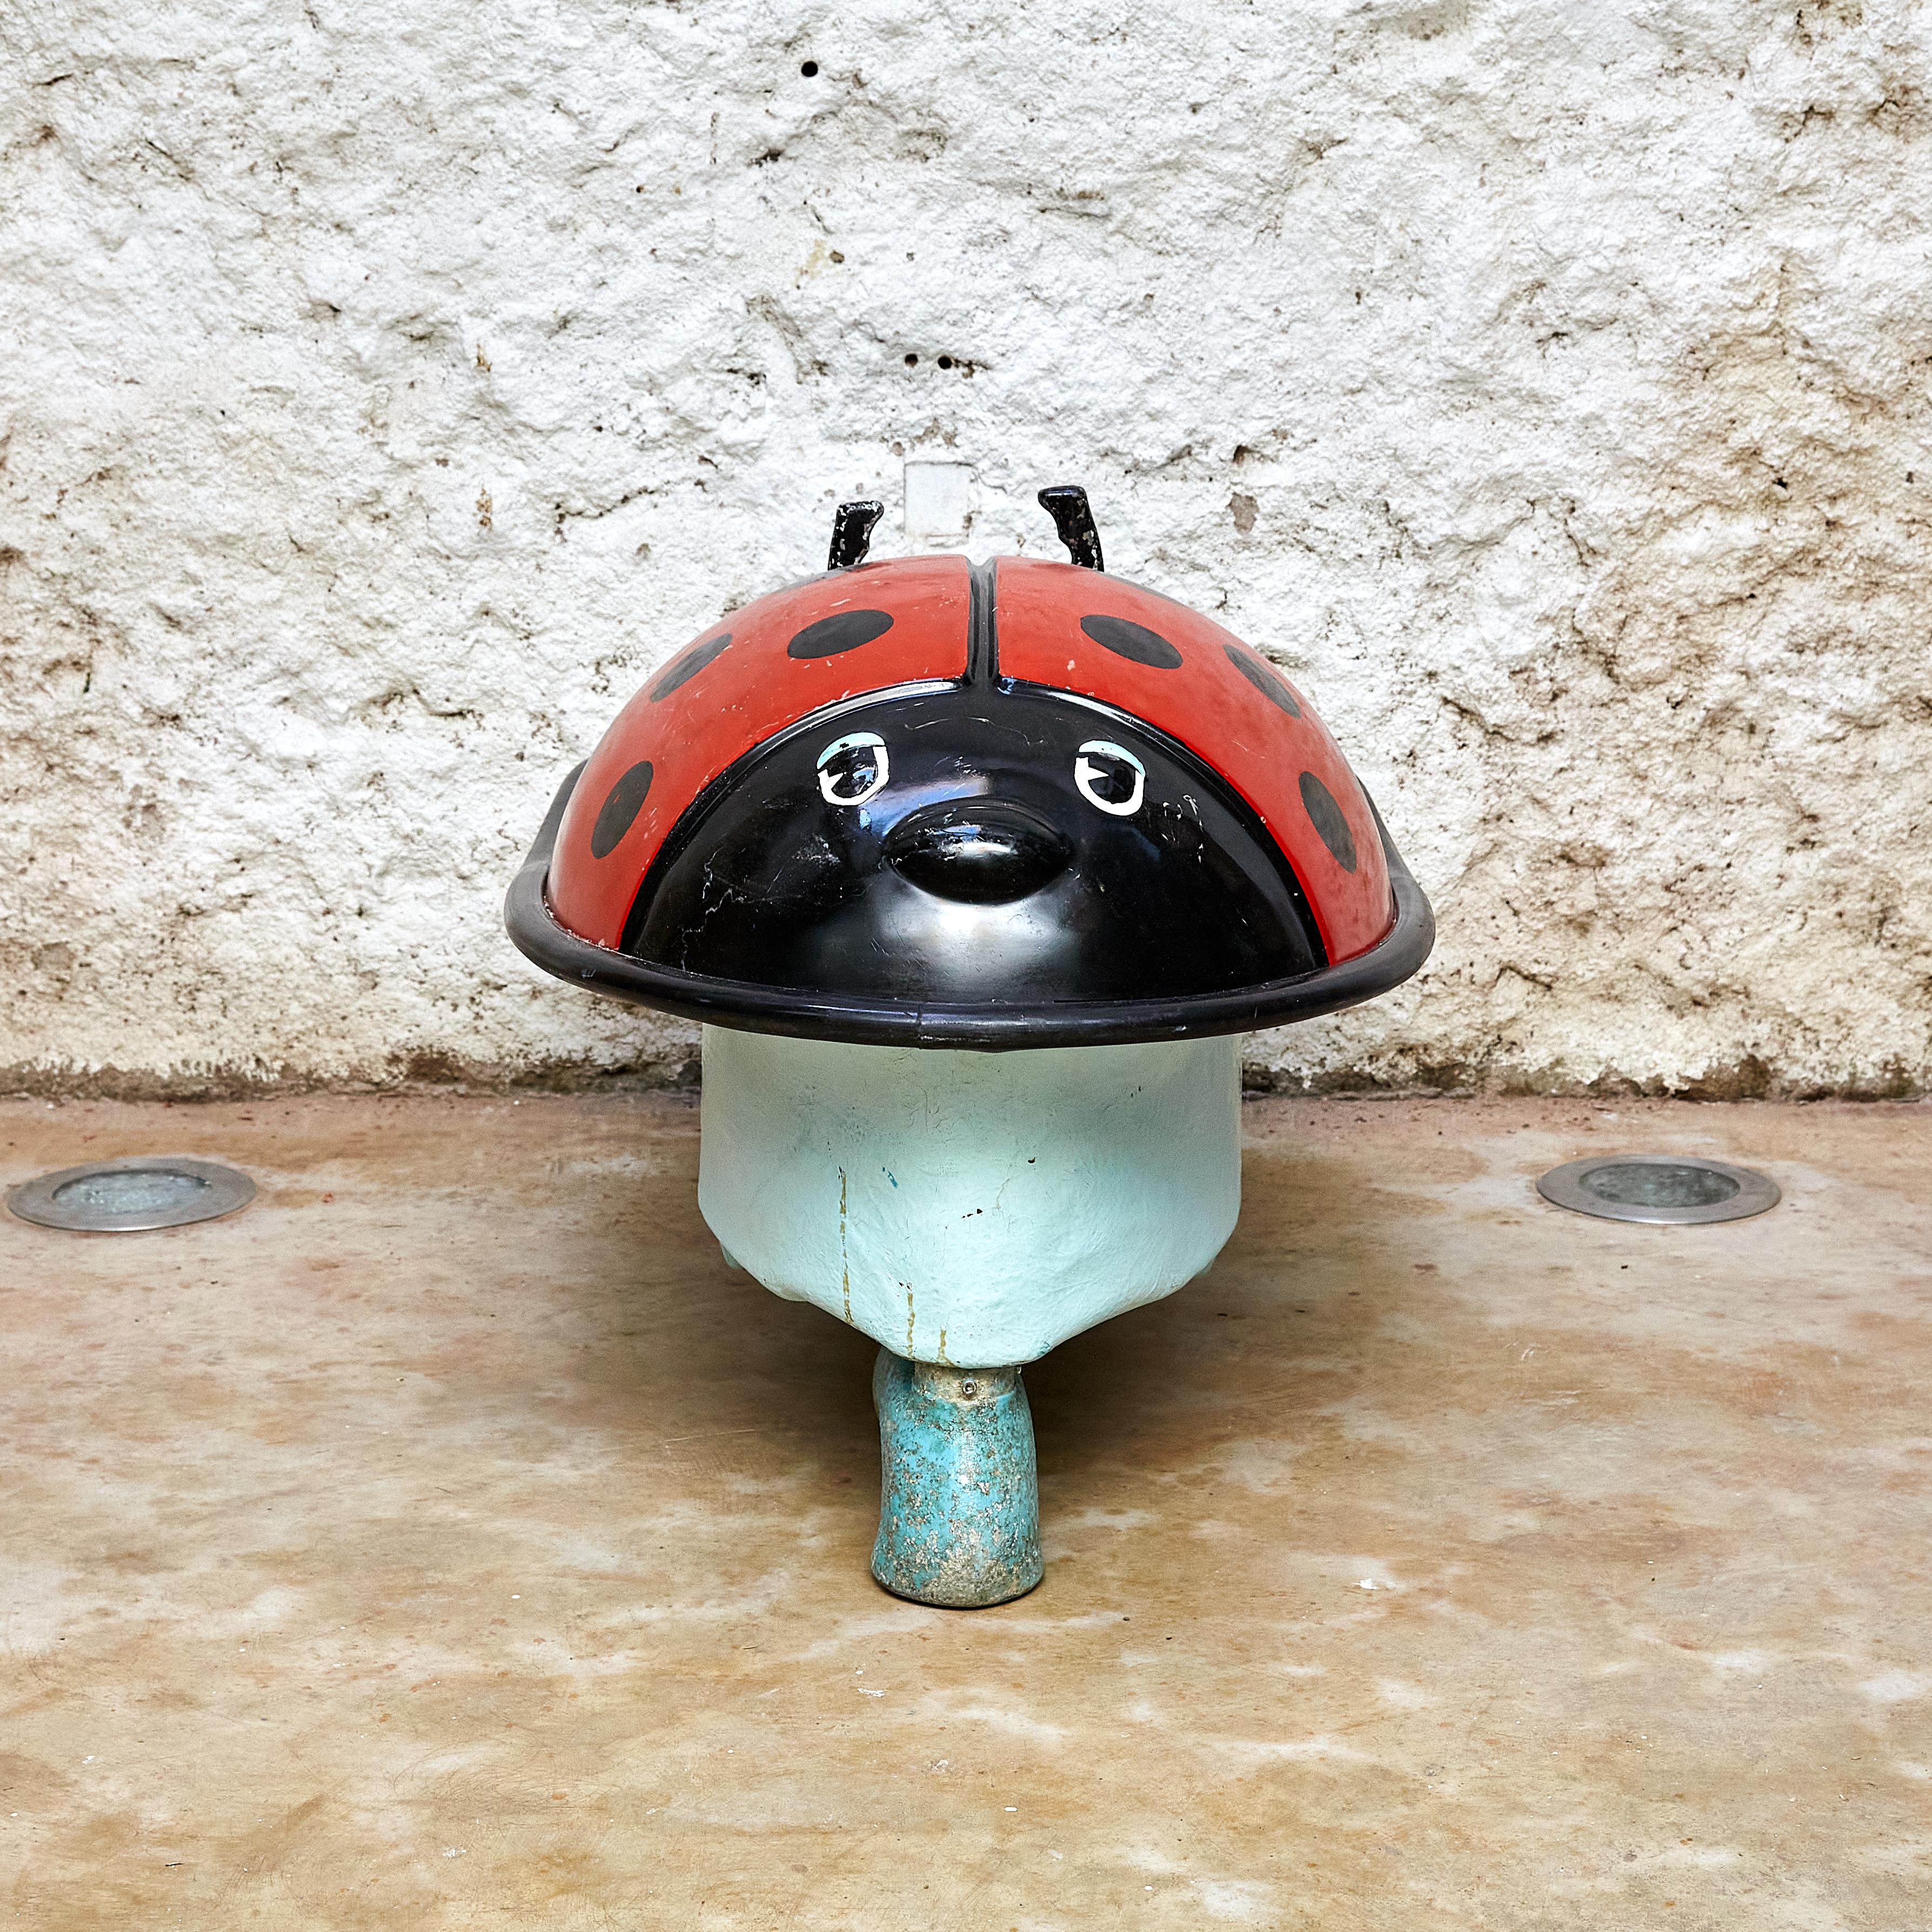 Fairground Ladybug Little Boat

Manufactured in Spain, circa 1970.

In original condition with minor wear consistent of age and use, preserving a beautiful patina.

Materials: 
Fiberglass 

Dimensions: 
D 108 cm x W 58 cm x H 58